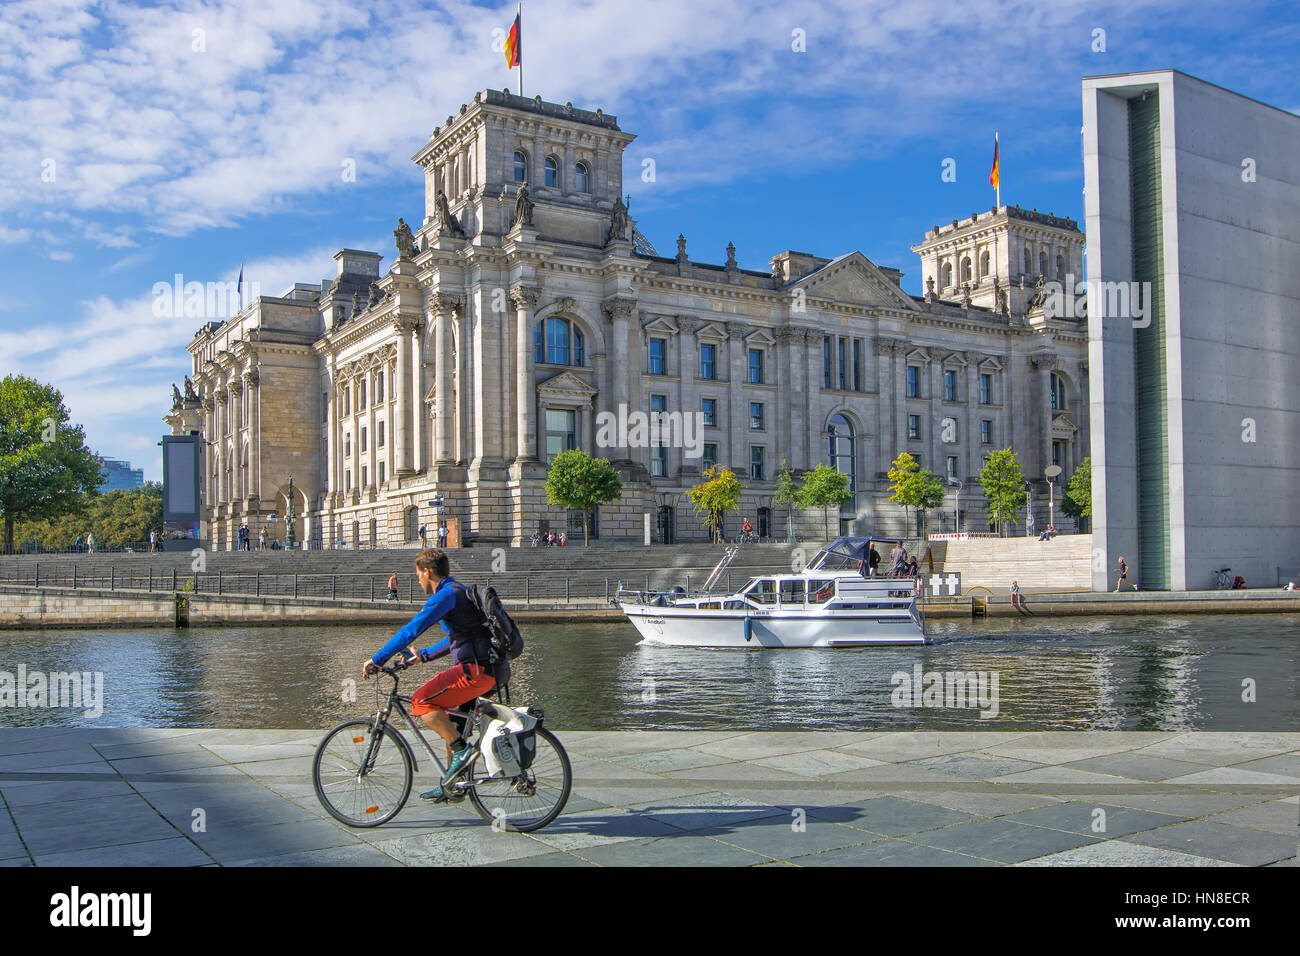 The Reichstag building and Spree river Stock Photo